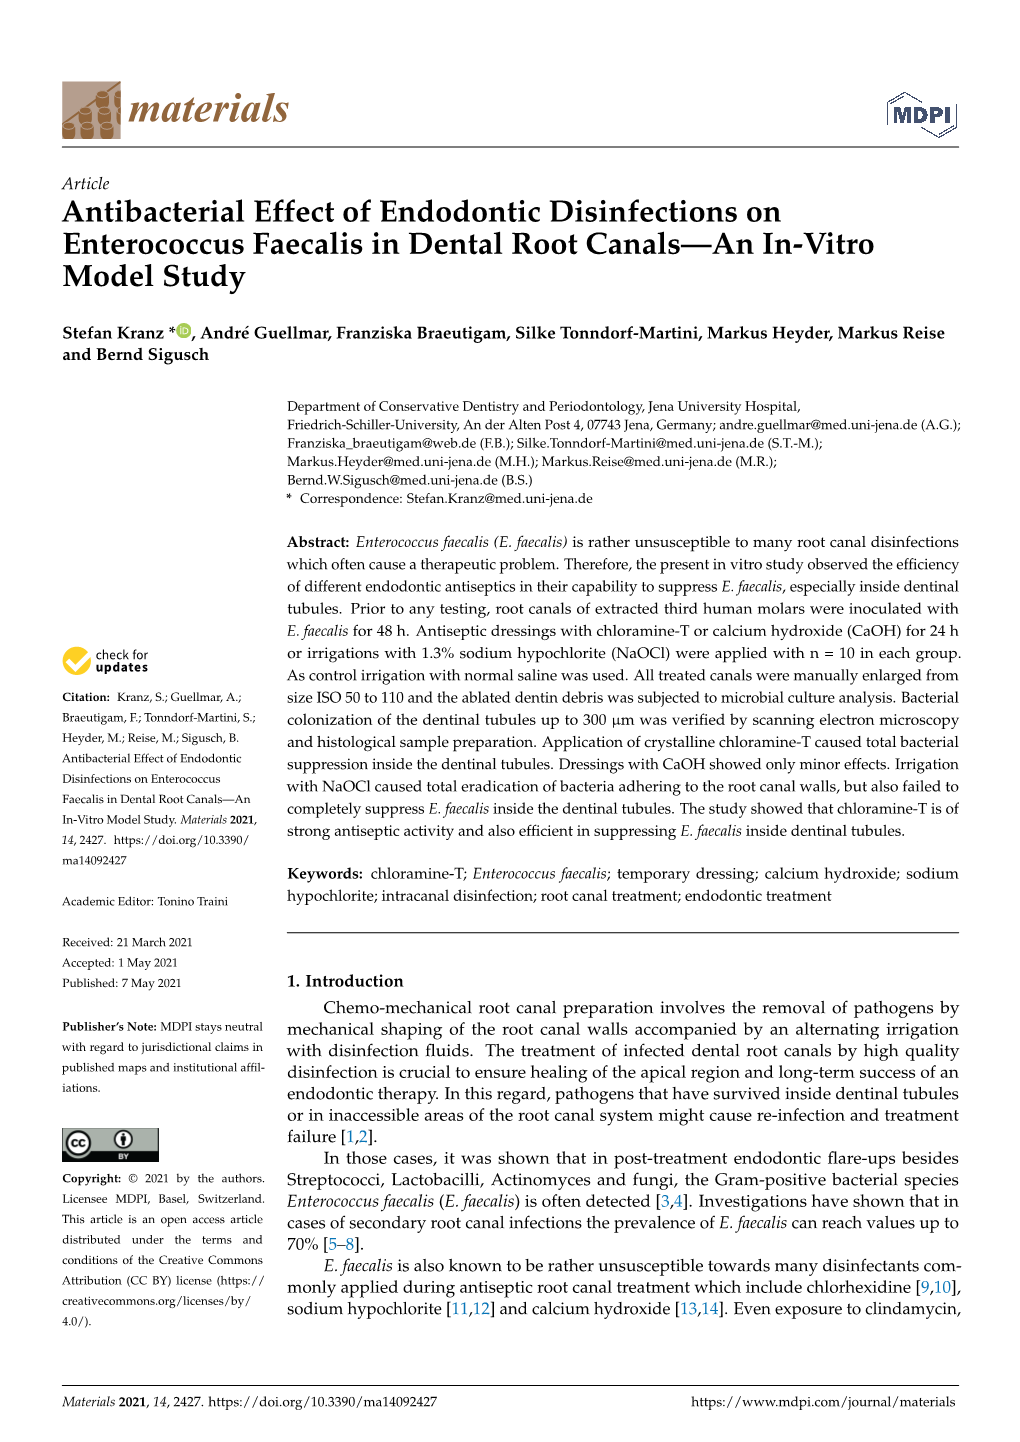 Antibacterial Effect of Endodontic Disinfections on Enterococcus Faecalis in Dental Root Canals—An In-Vitro Model Study